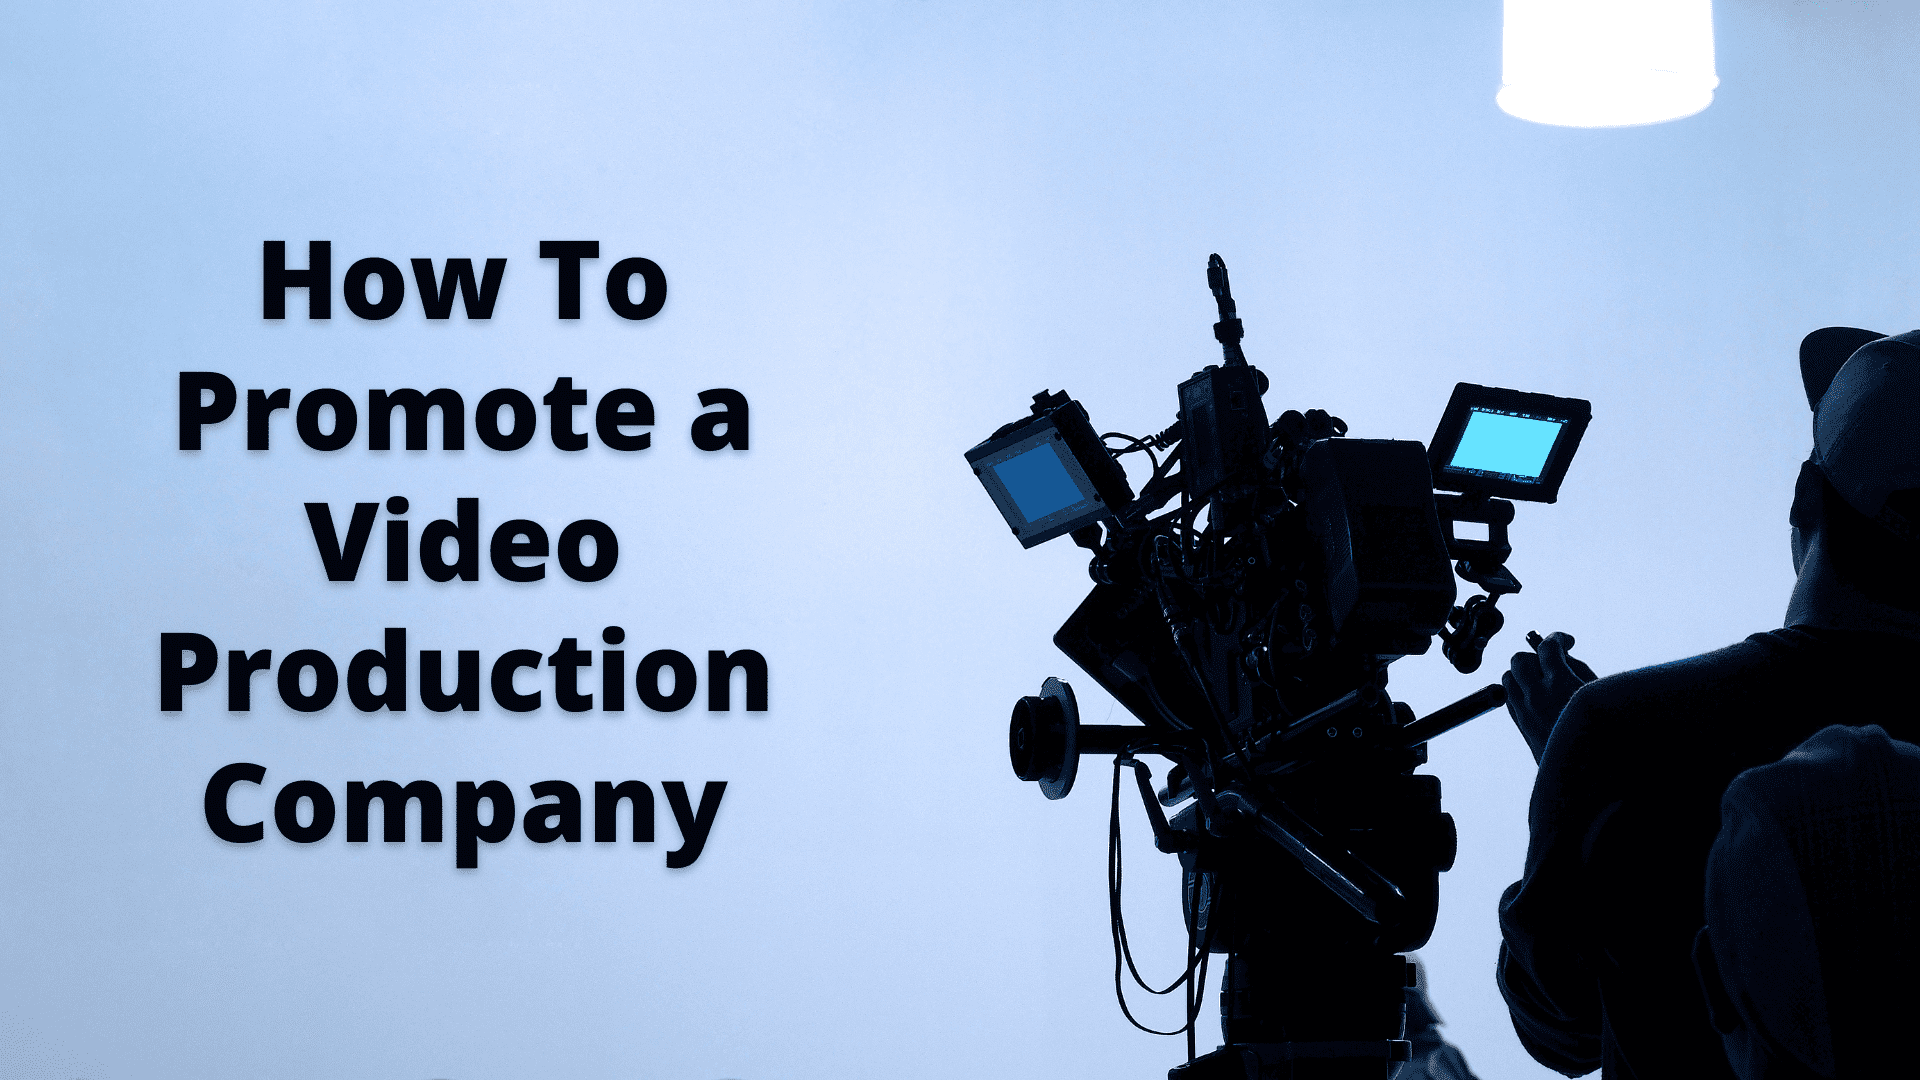 How To Promote a Video Production Company 1920 × 1080